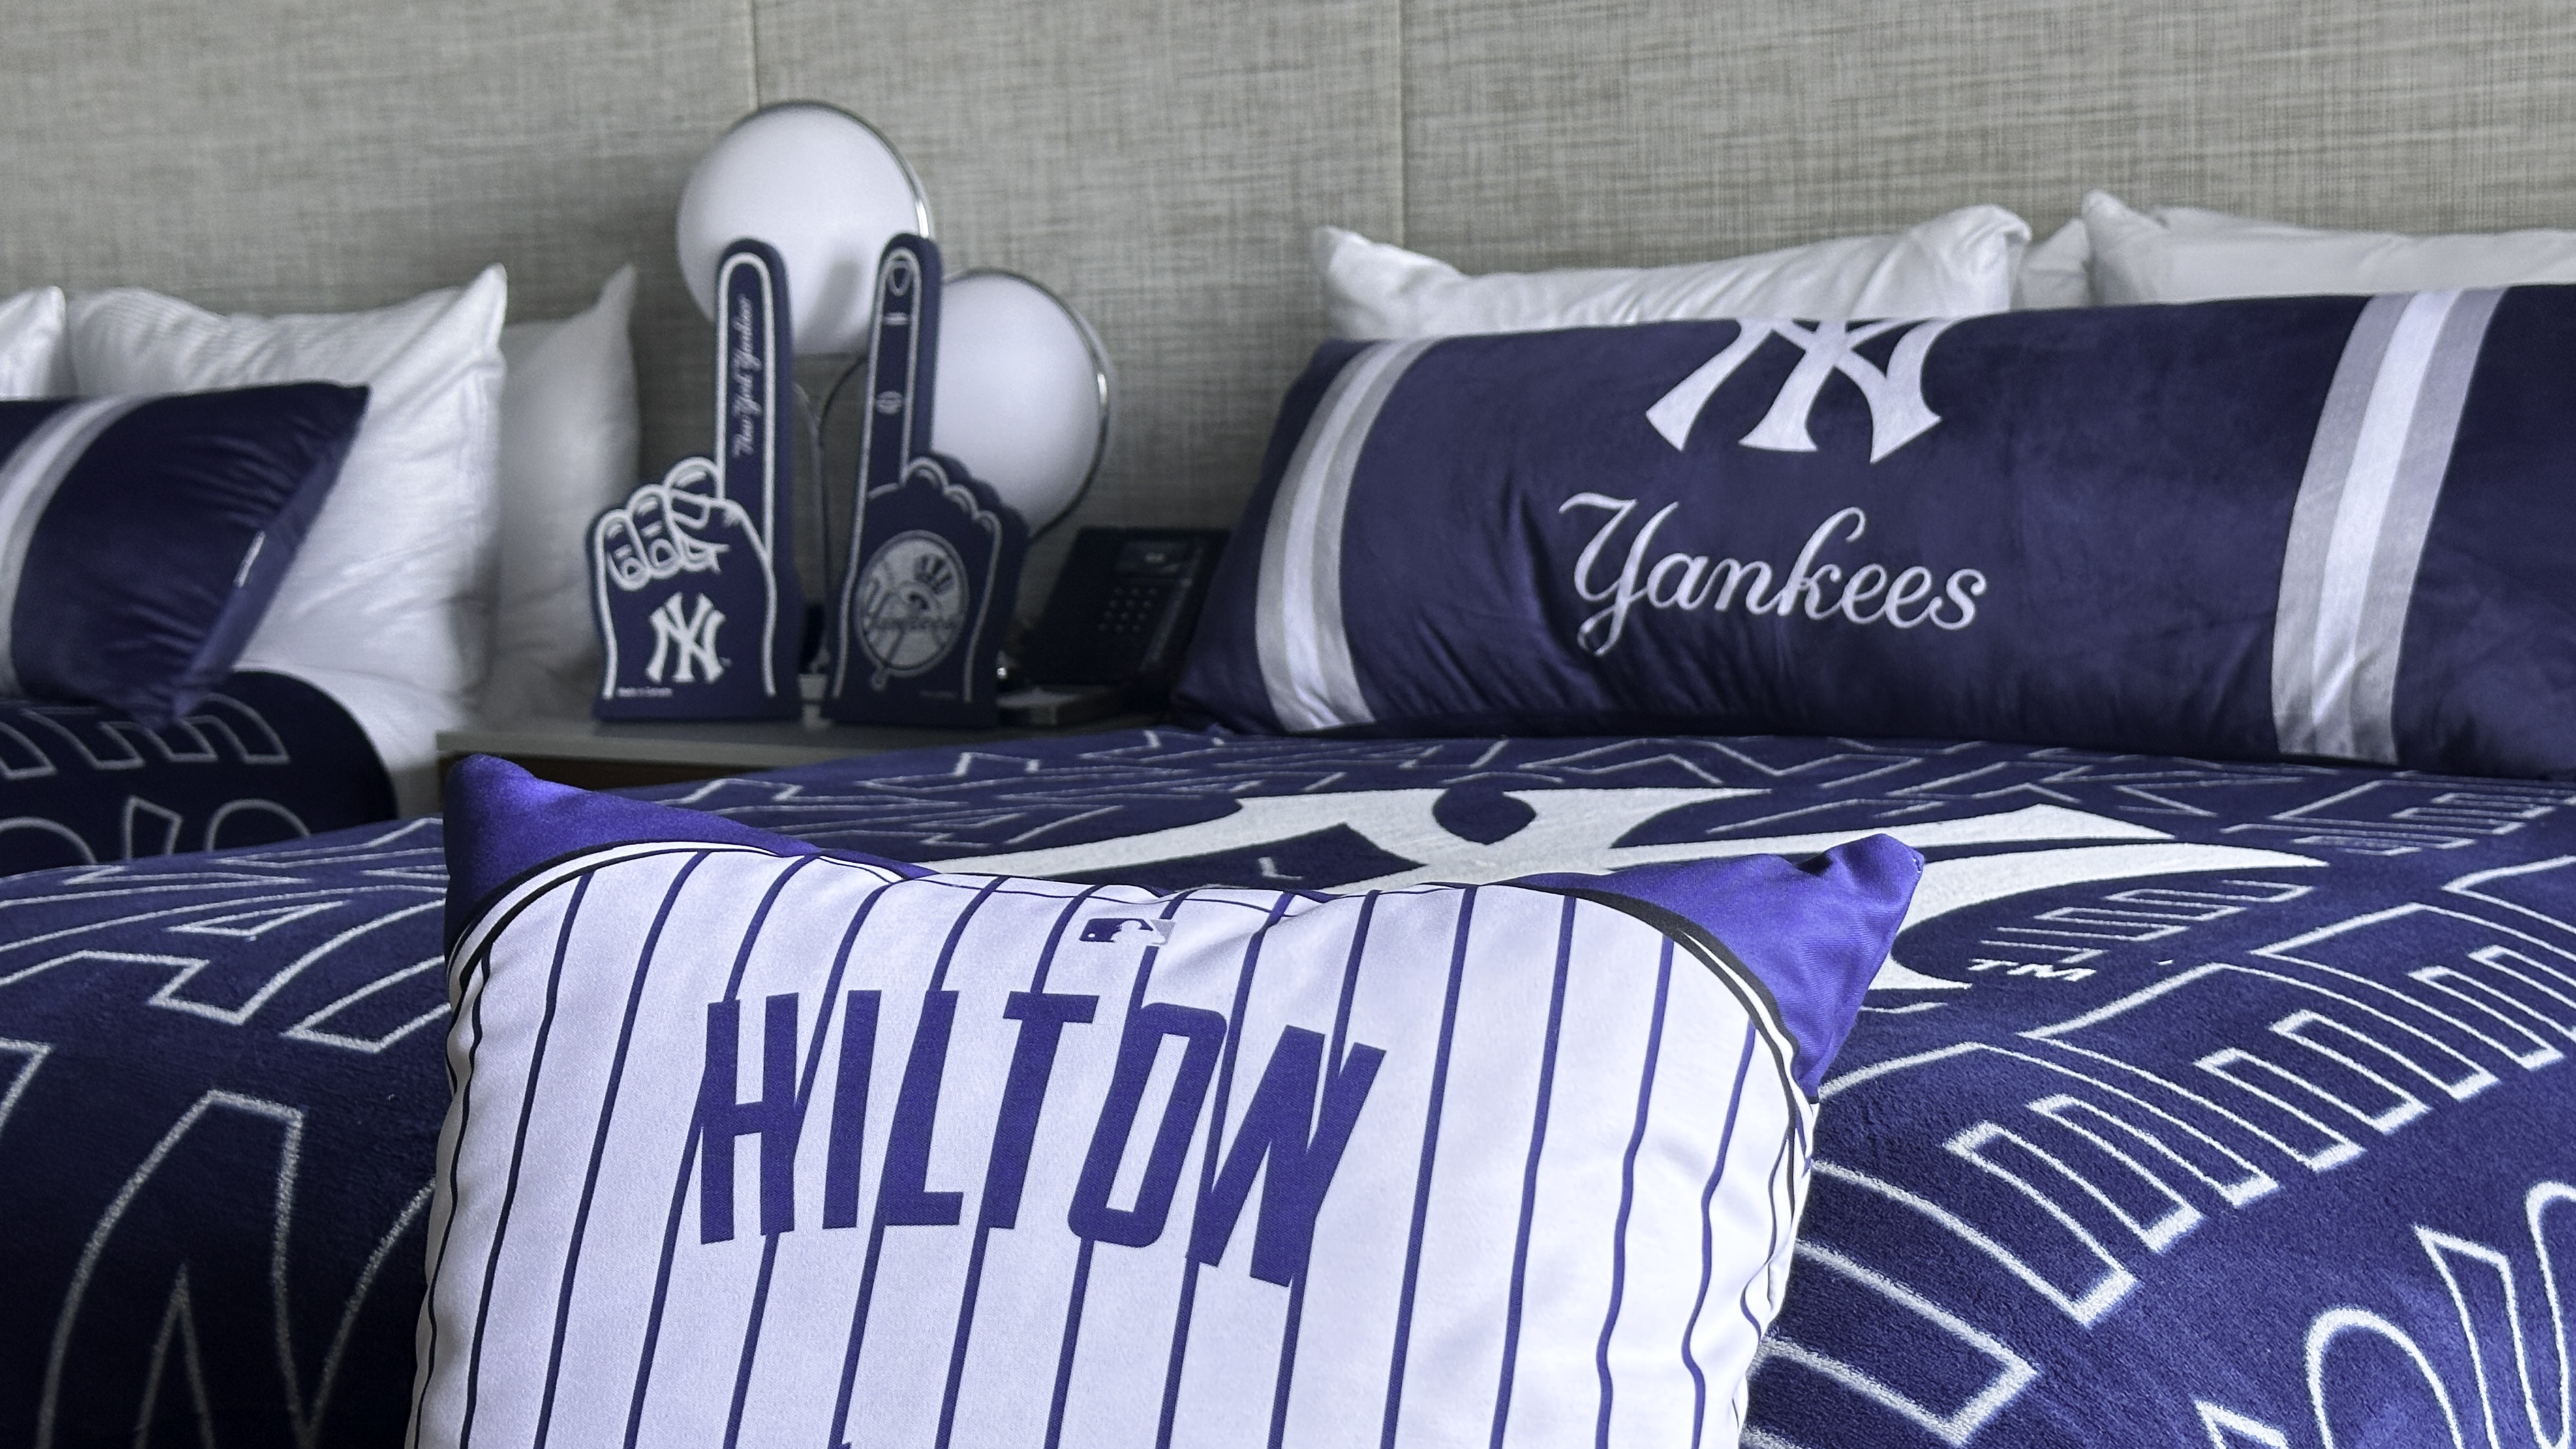 New York Hilton Midtown Hits a Home Run with the Grand Slam Suite,  Celebrating the Legendary New York Yankees